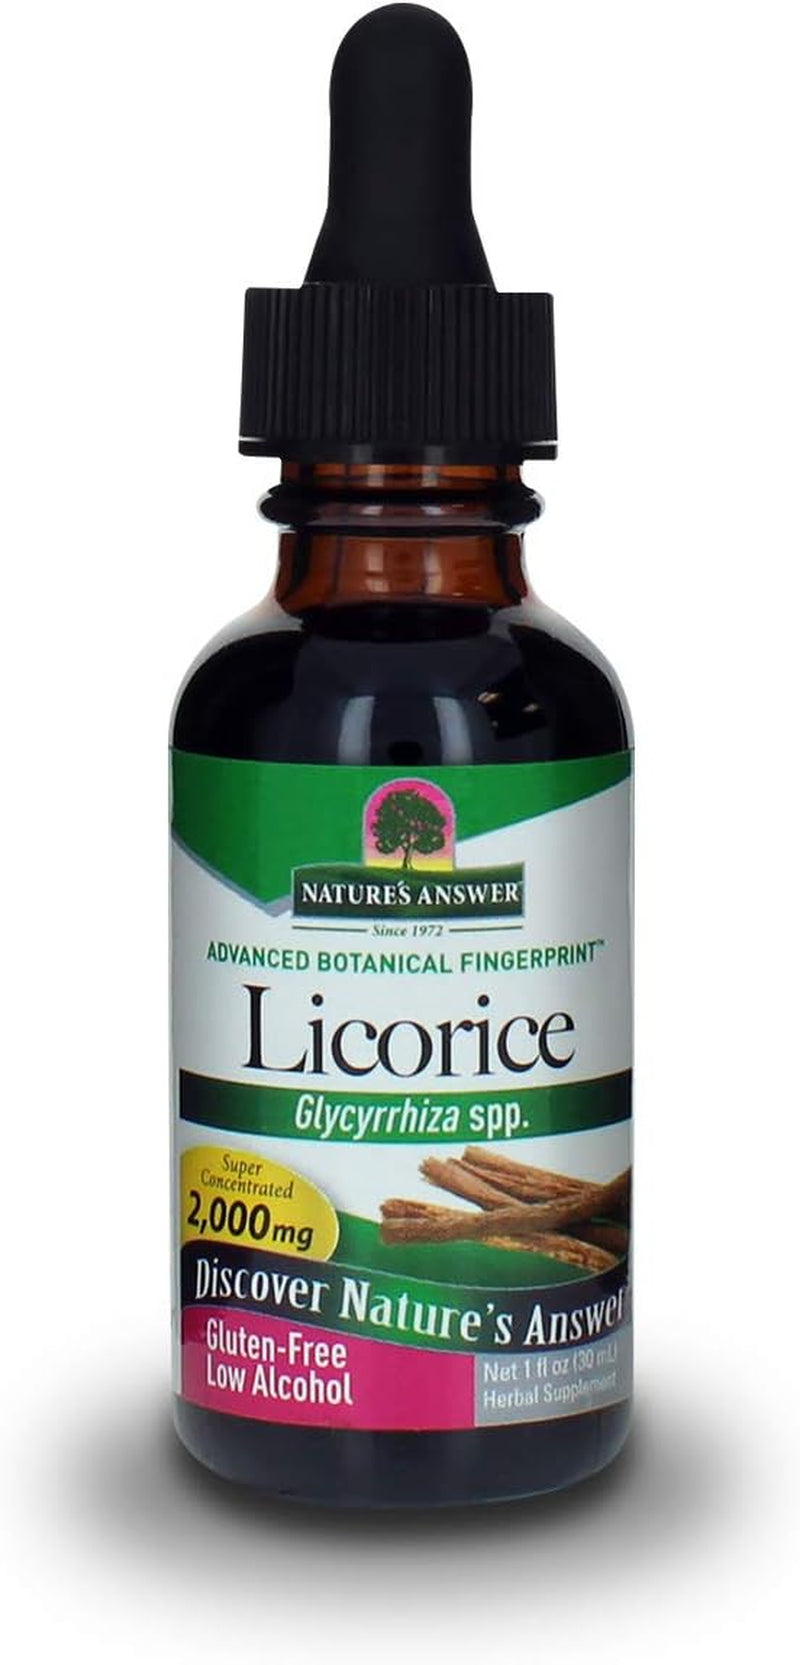 Nature'S Answer Organic Low Alcohol Licorice Root 2000Mg 1Oz Extract | Digestion Support | Natural Immune Booster | Promotes Lung Function | Gluten-Free, Non-Gmo, Vegan | Single Count